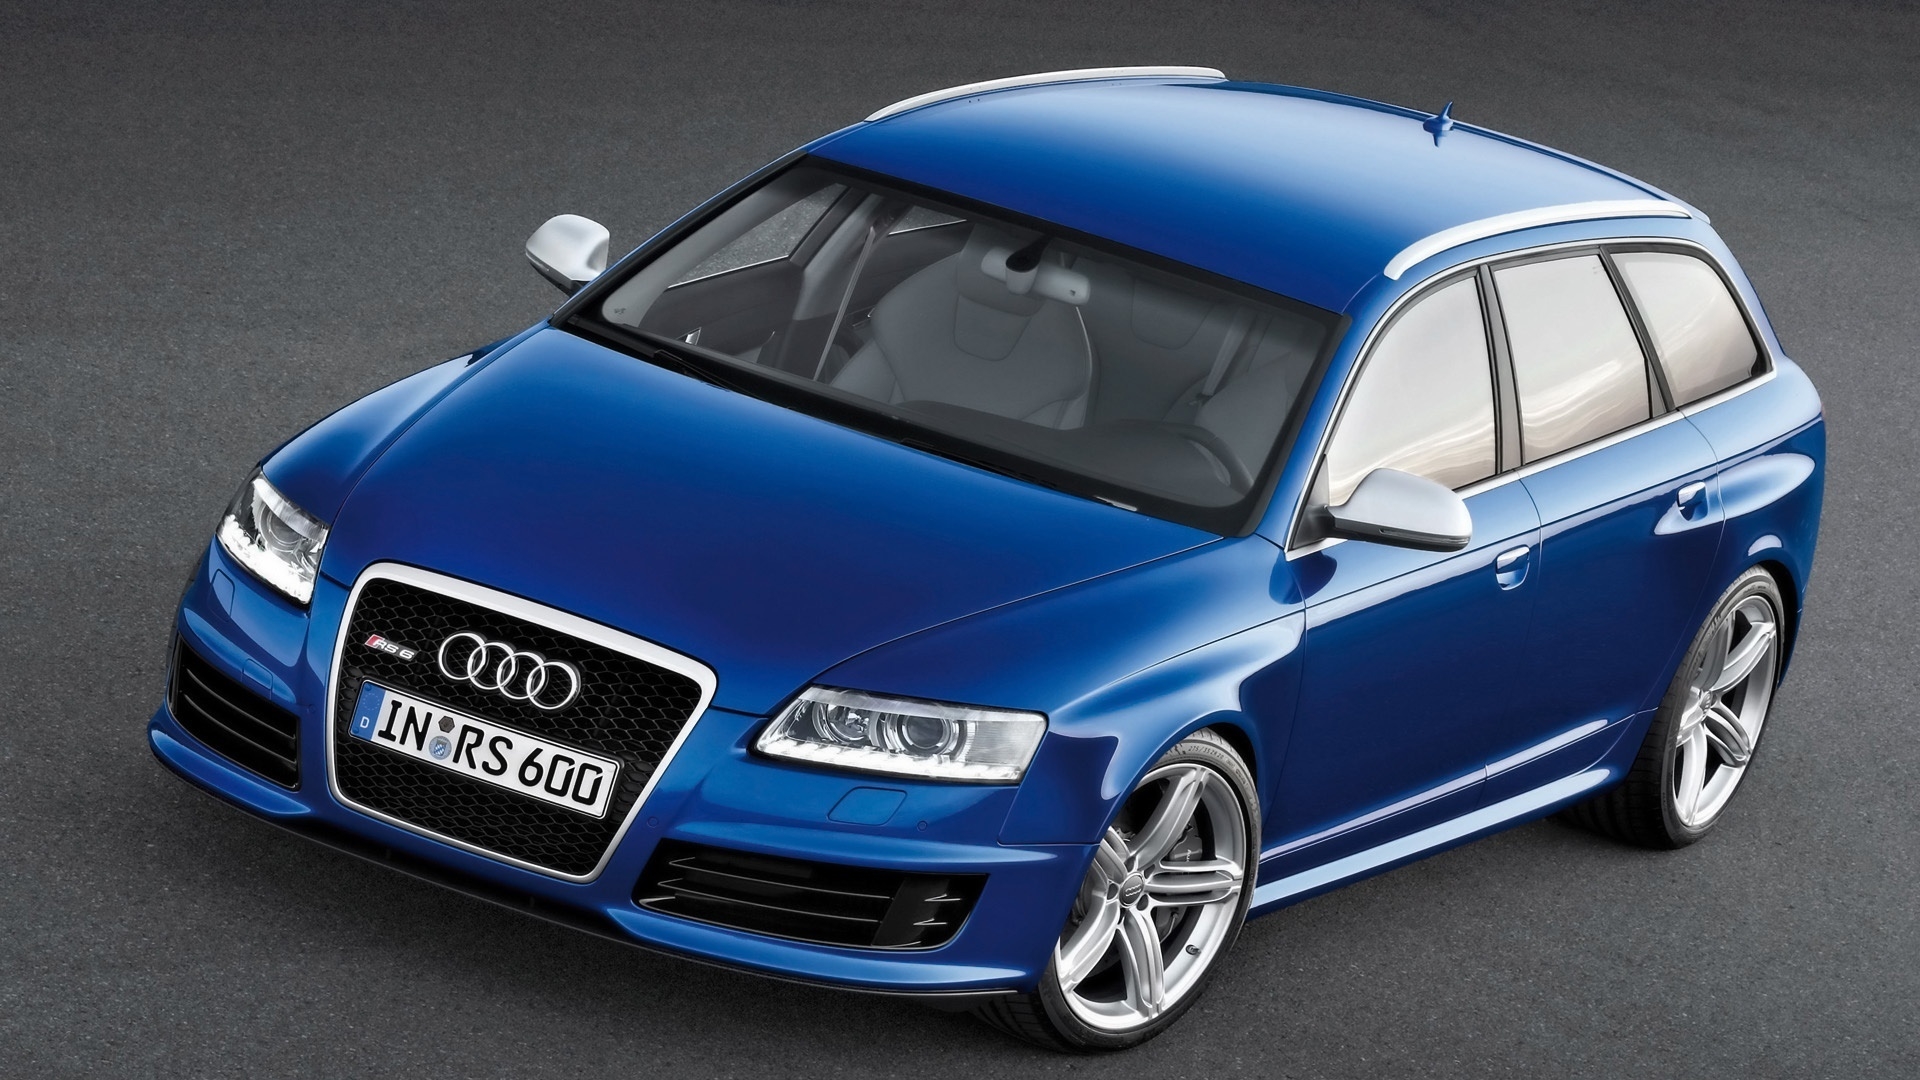 Audi RS6 Avant Front And Side 2008 for 1920 x 1080 HDTV 1080p resolution